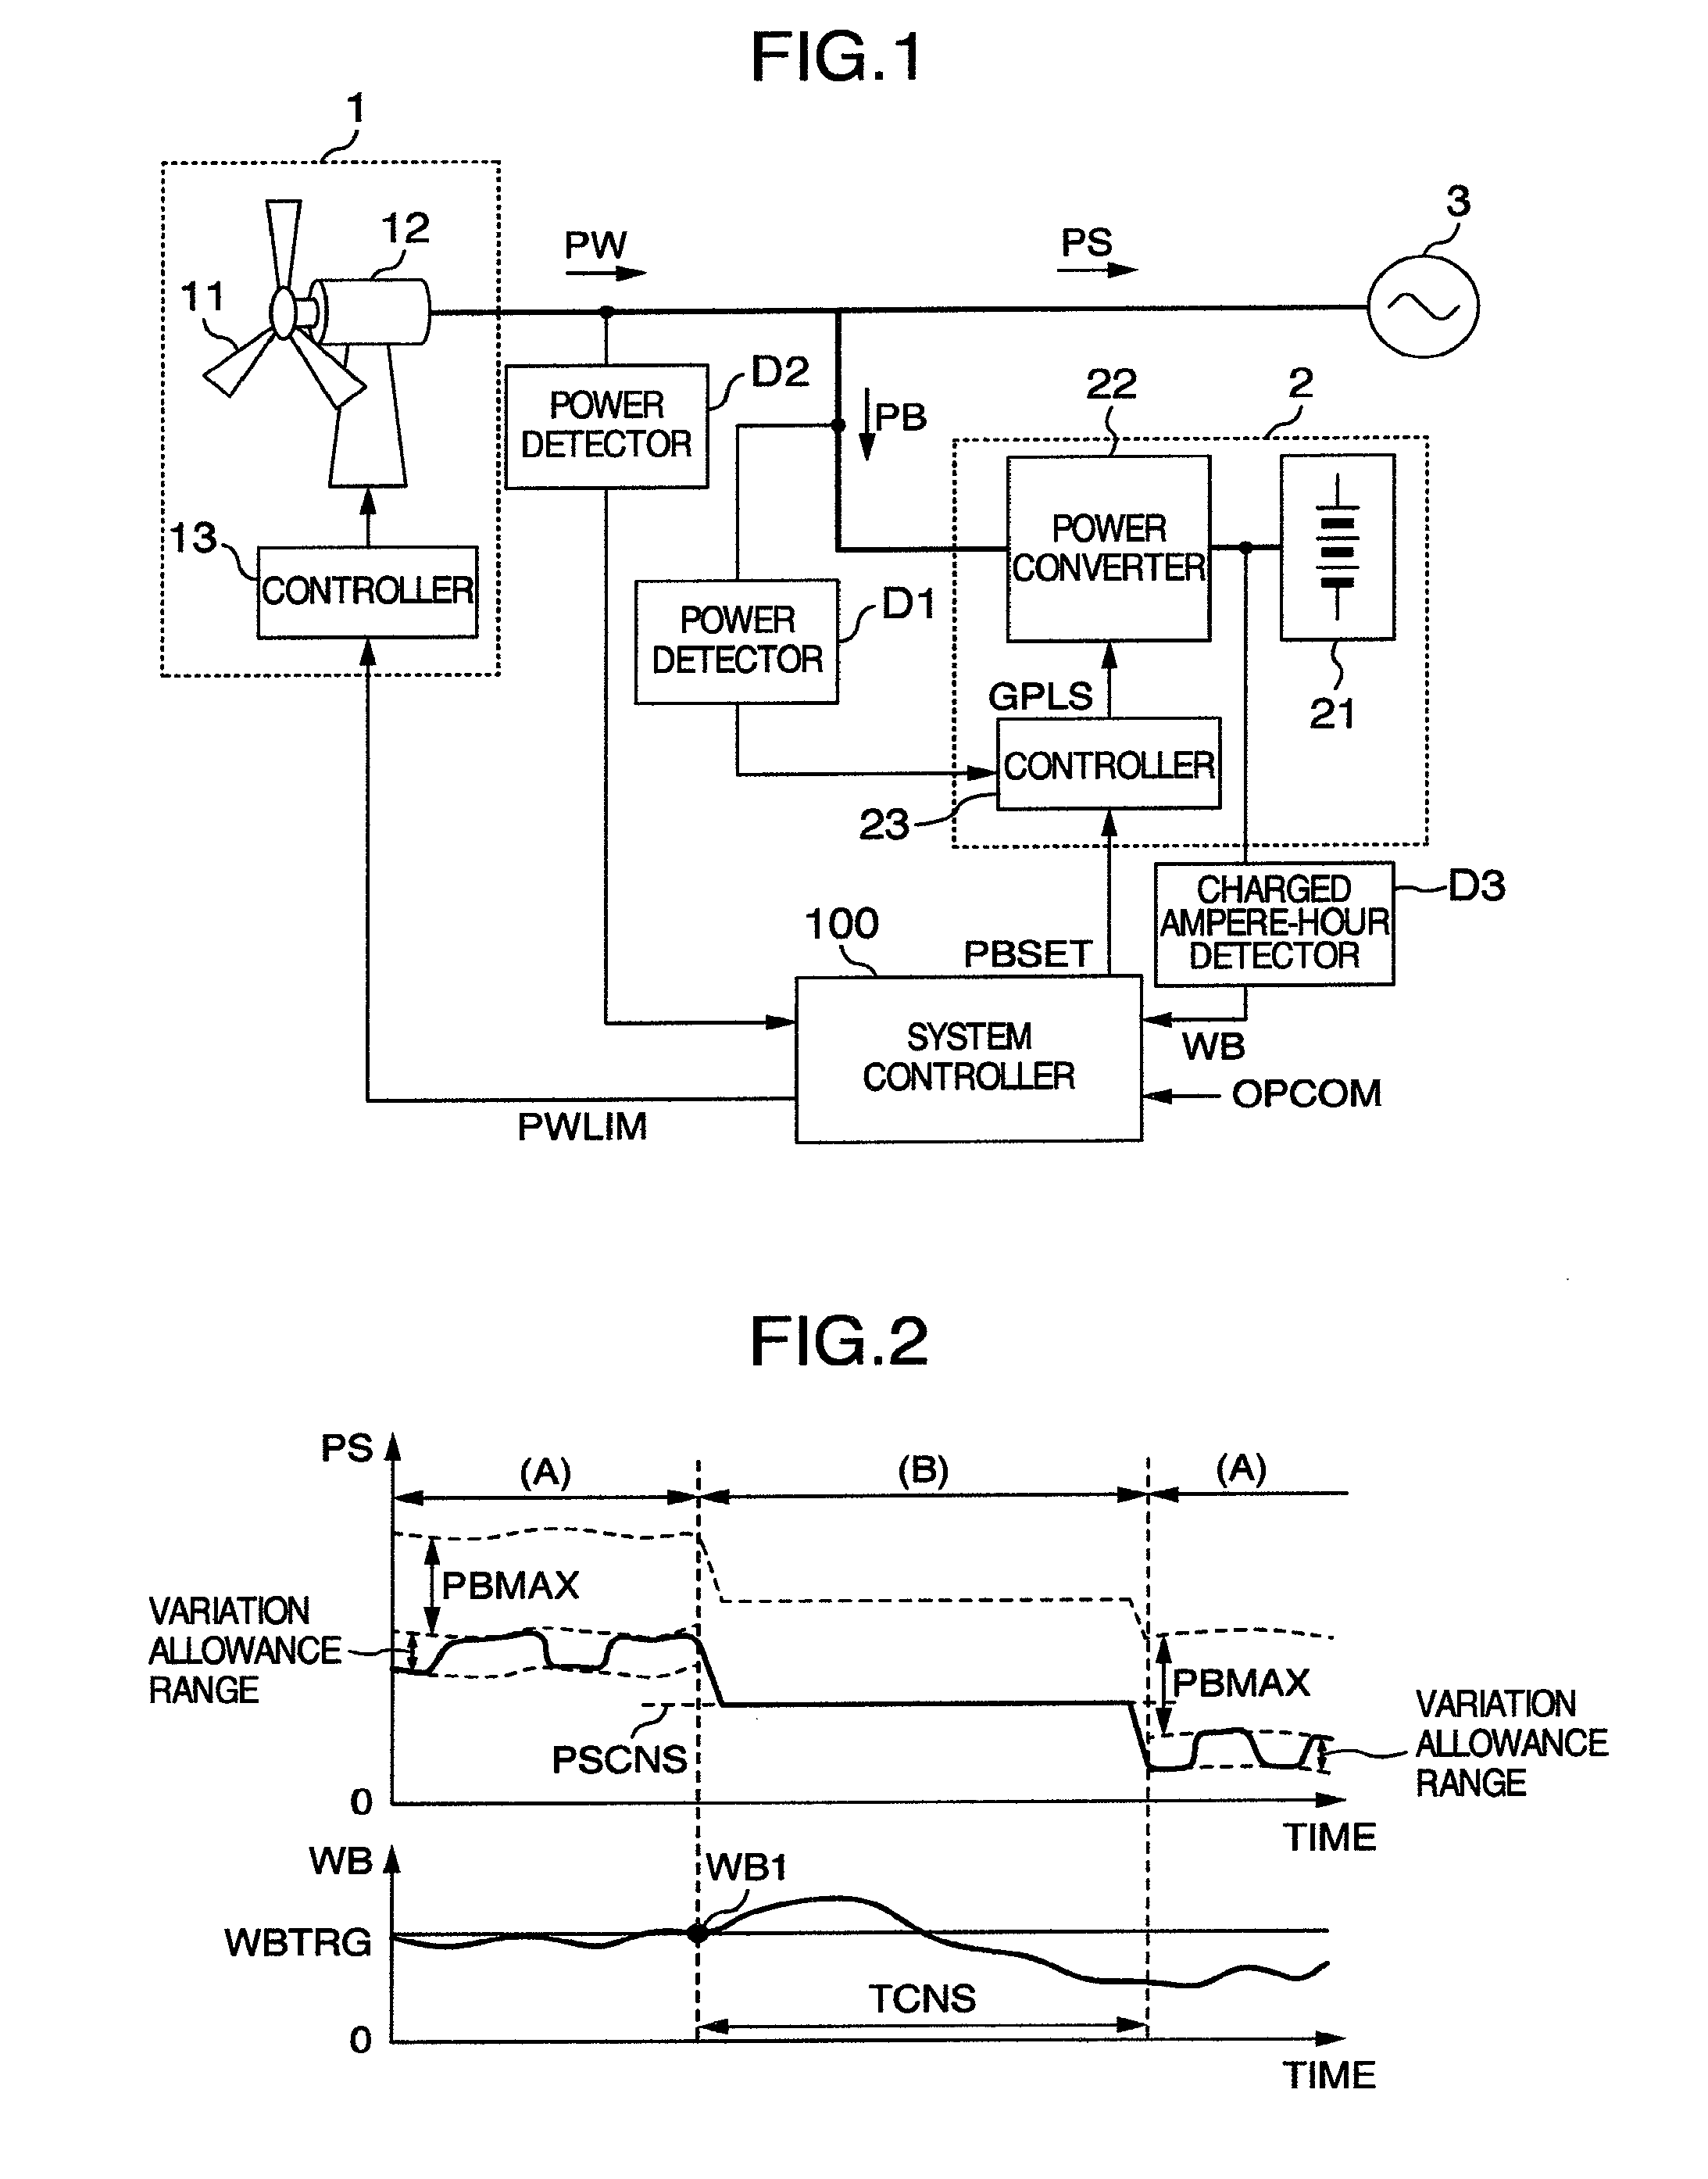 Hybrid power generation of wind-power generator and battery energy storage system